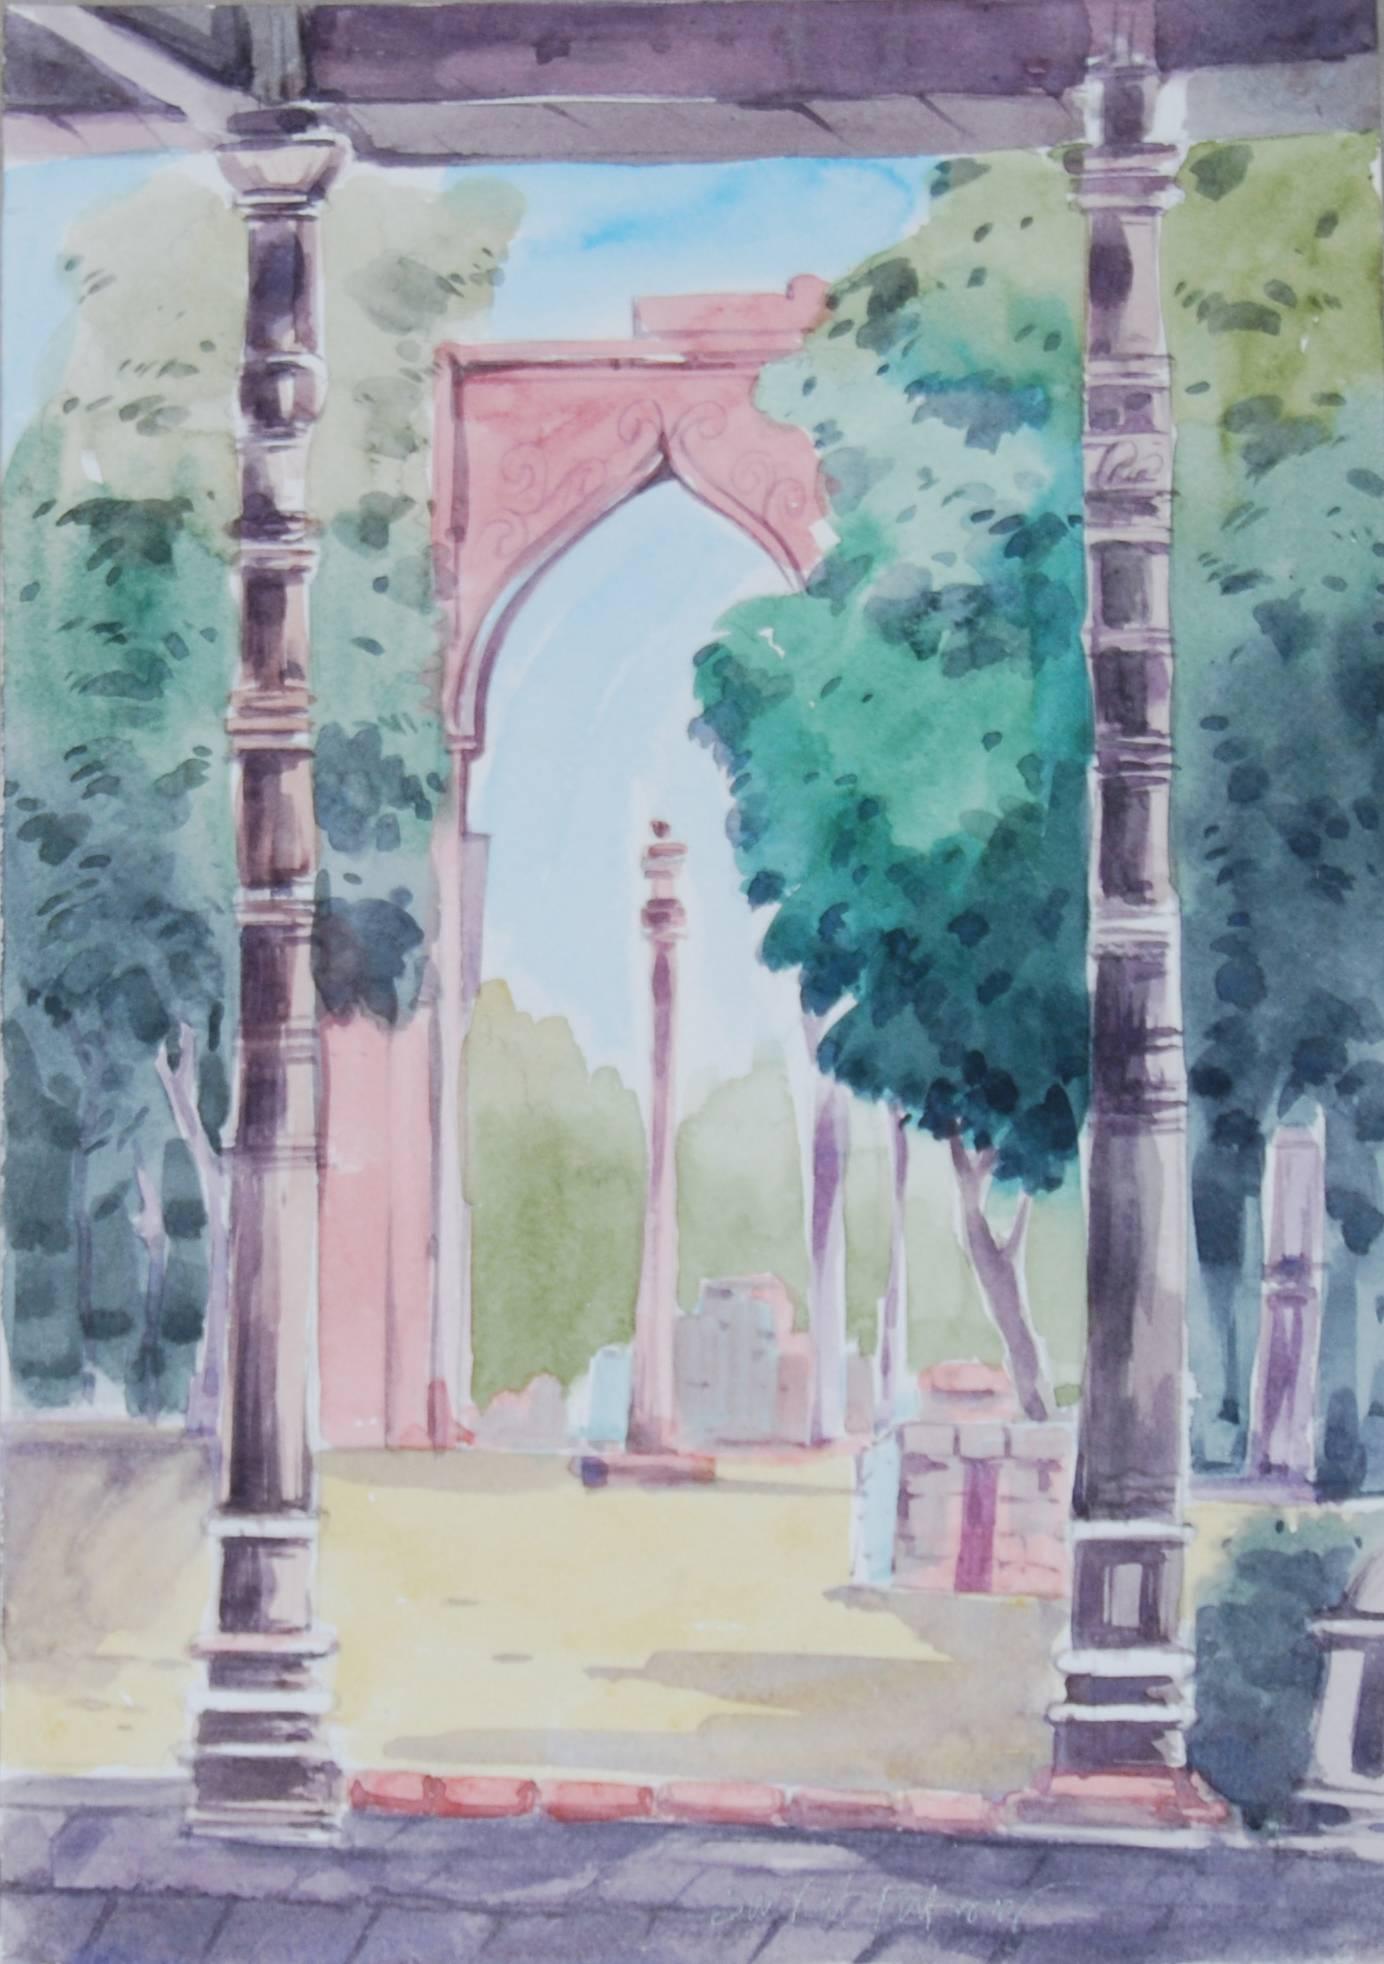 Saikat Patra - Untitled - 15 x 11 inches (unframed size)
Watercolour on paper

Style : Saikat Patra highly talented water colorist from Bengal.
In this series of 10 water colour, Saikat traces few game changing moments in India. From invasion / war